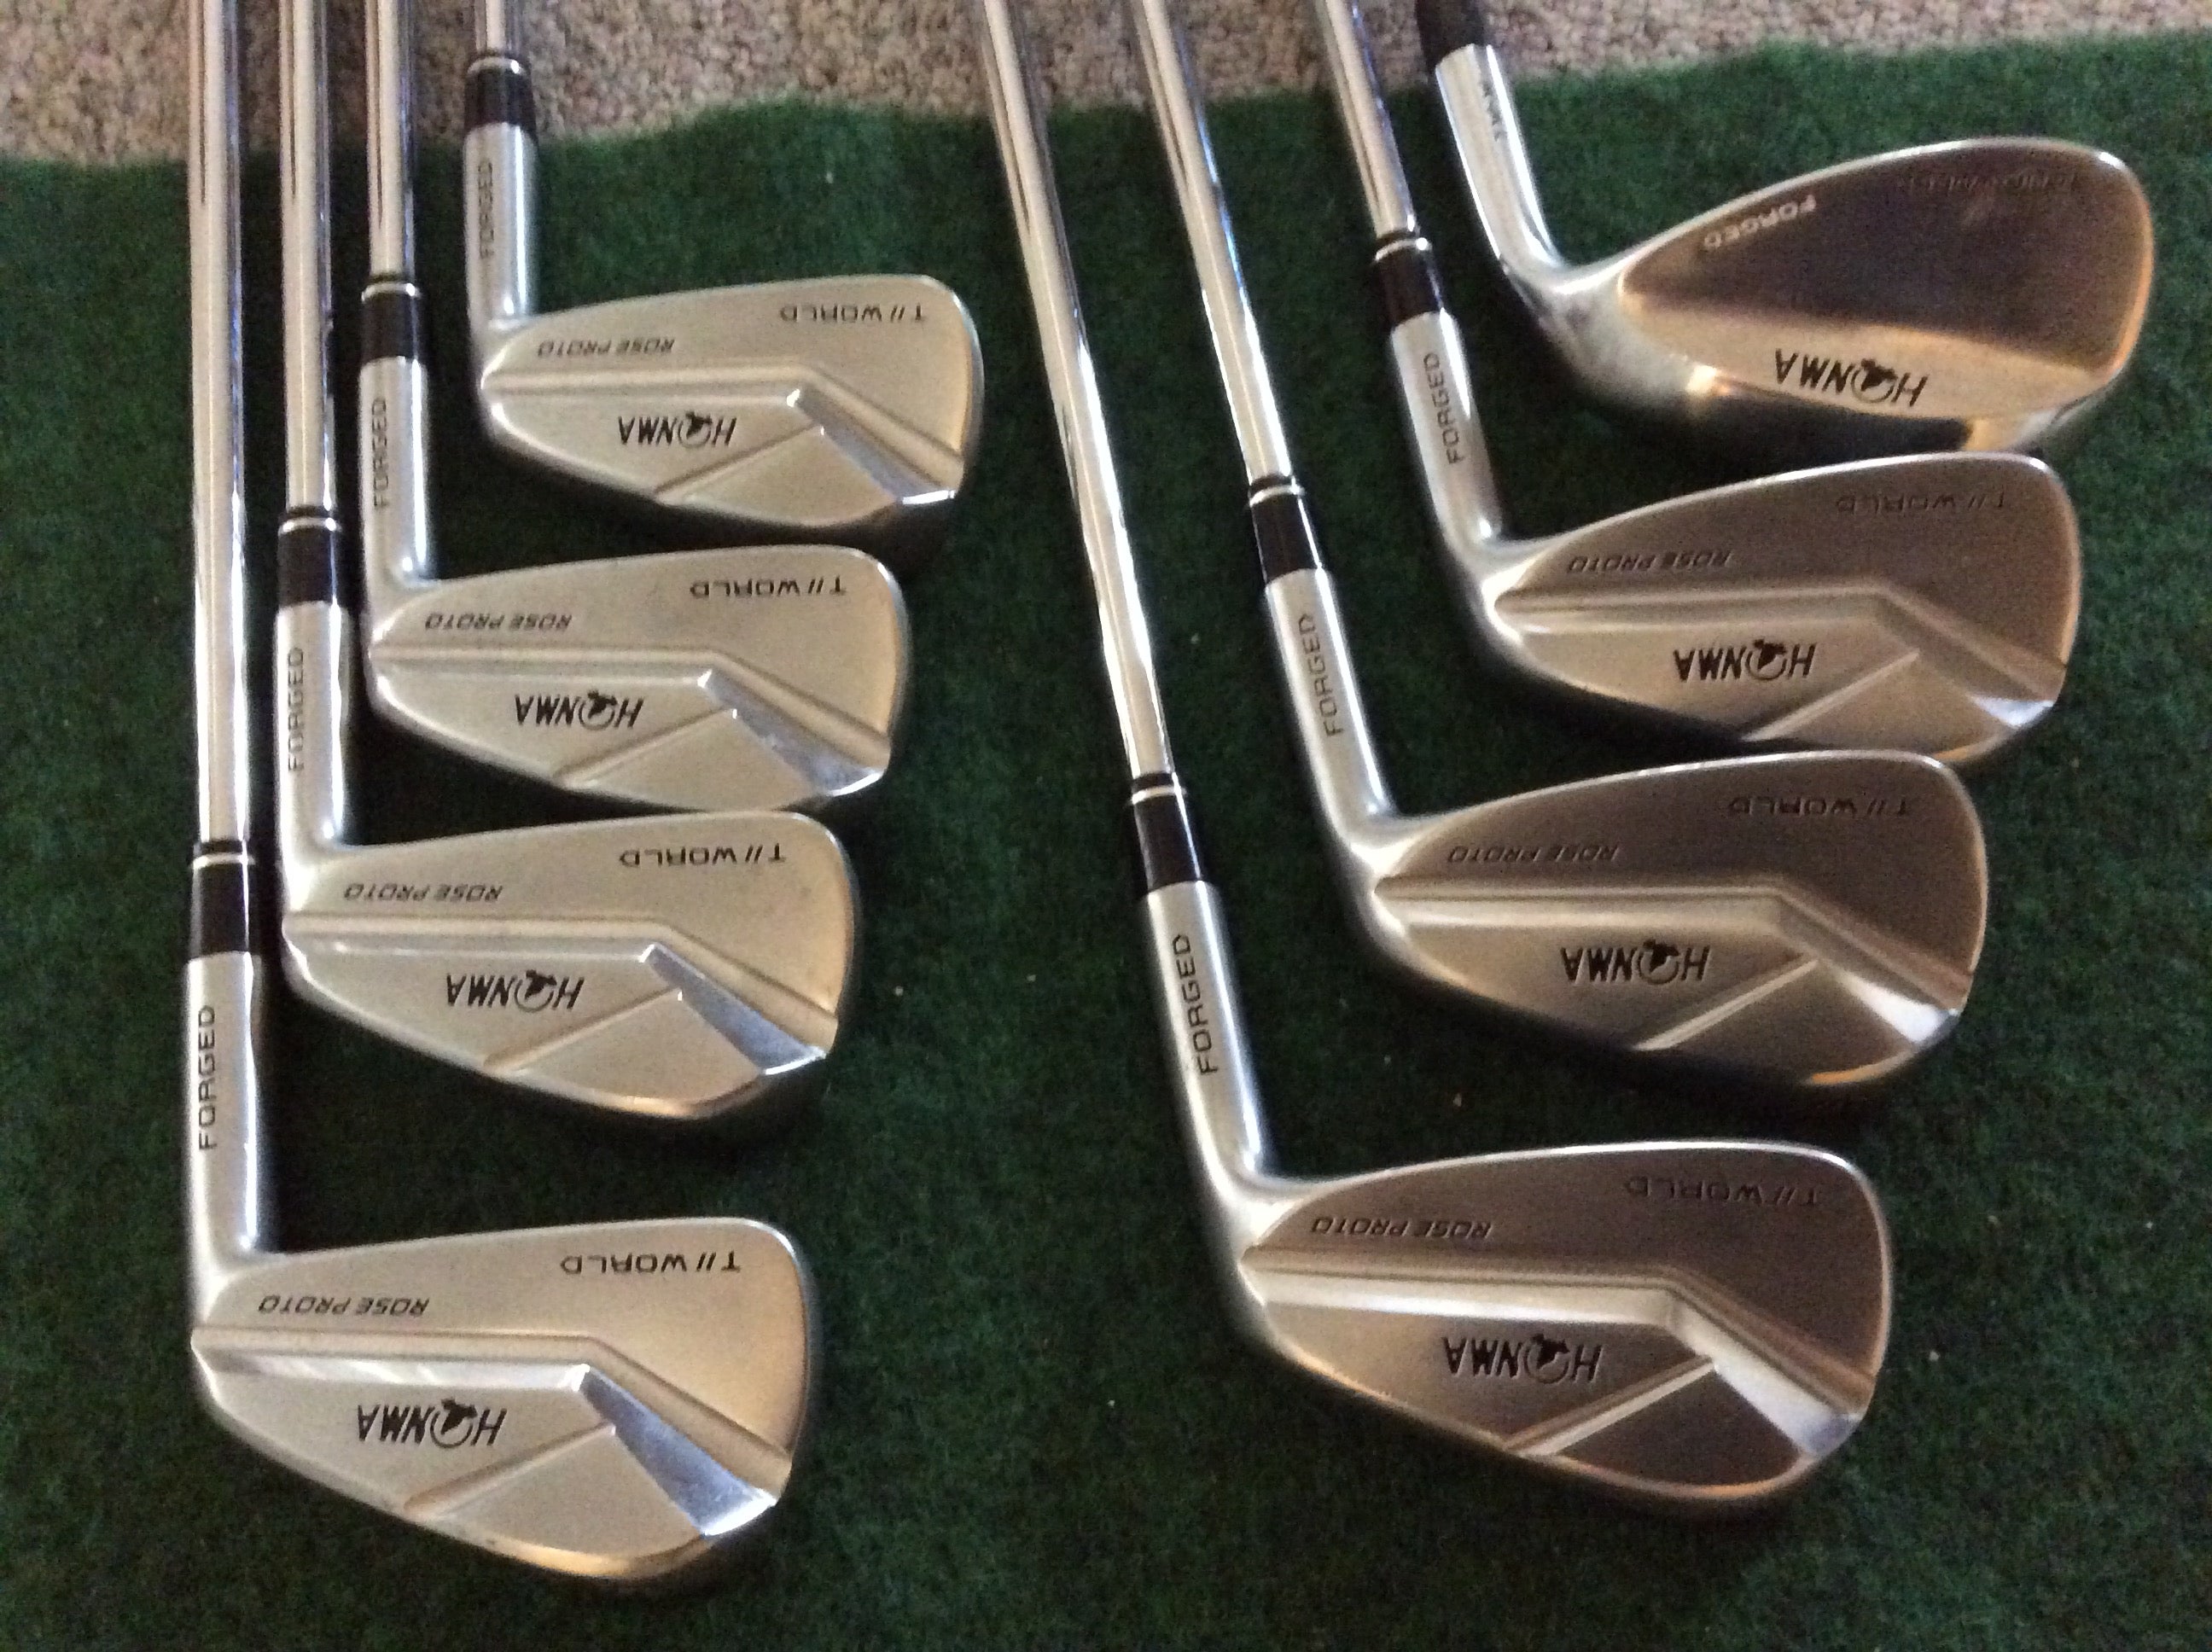 Honma Golf Clubs and Equipment for sale | New and Used on 